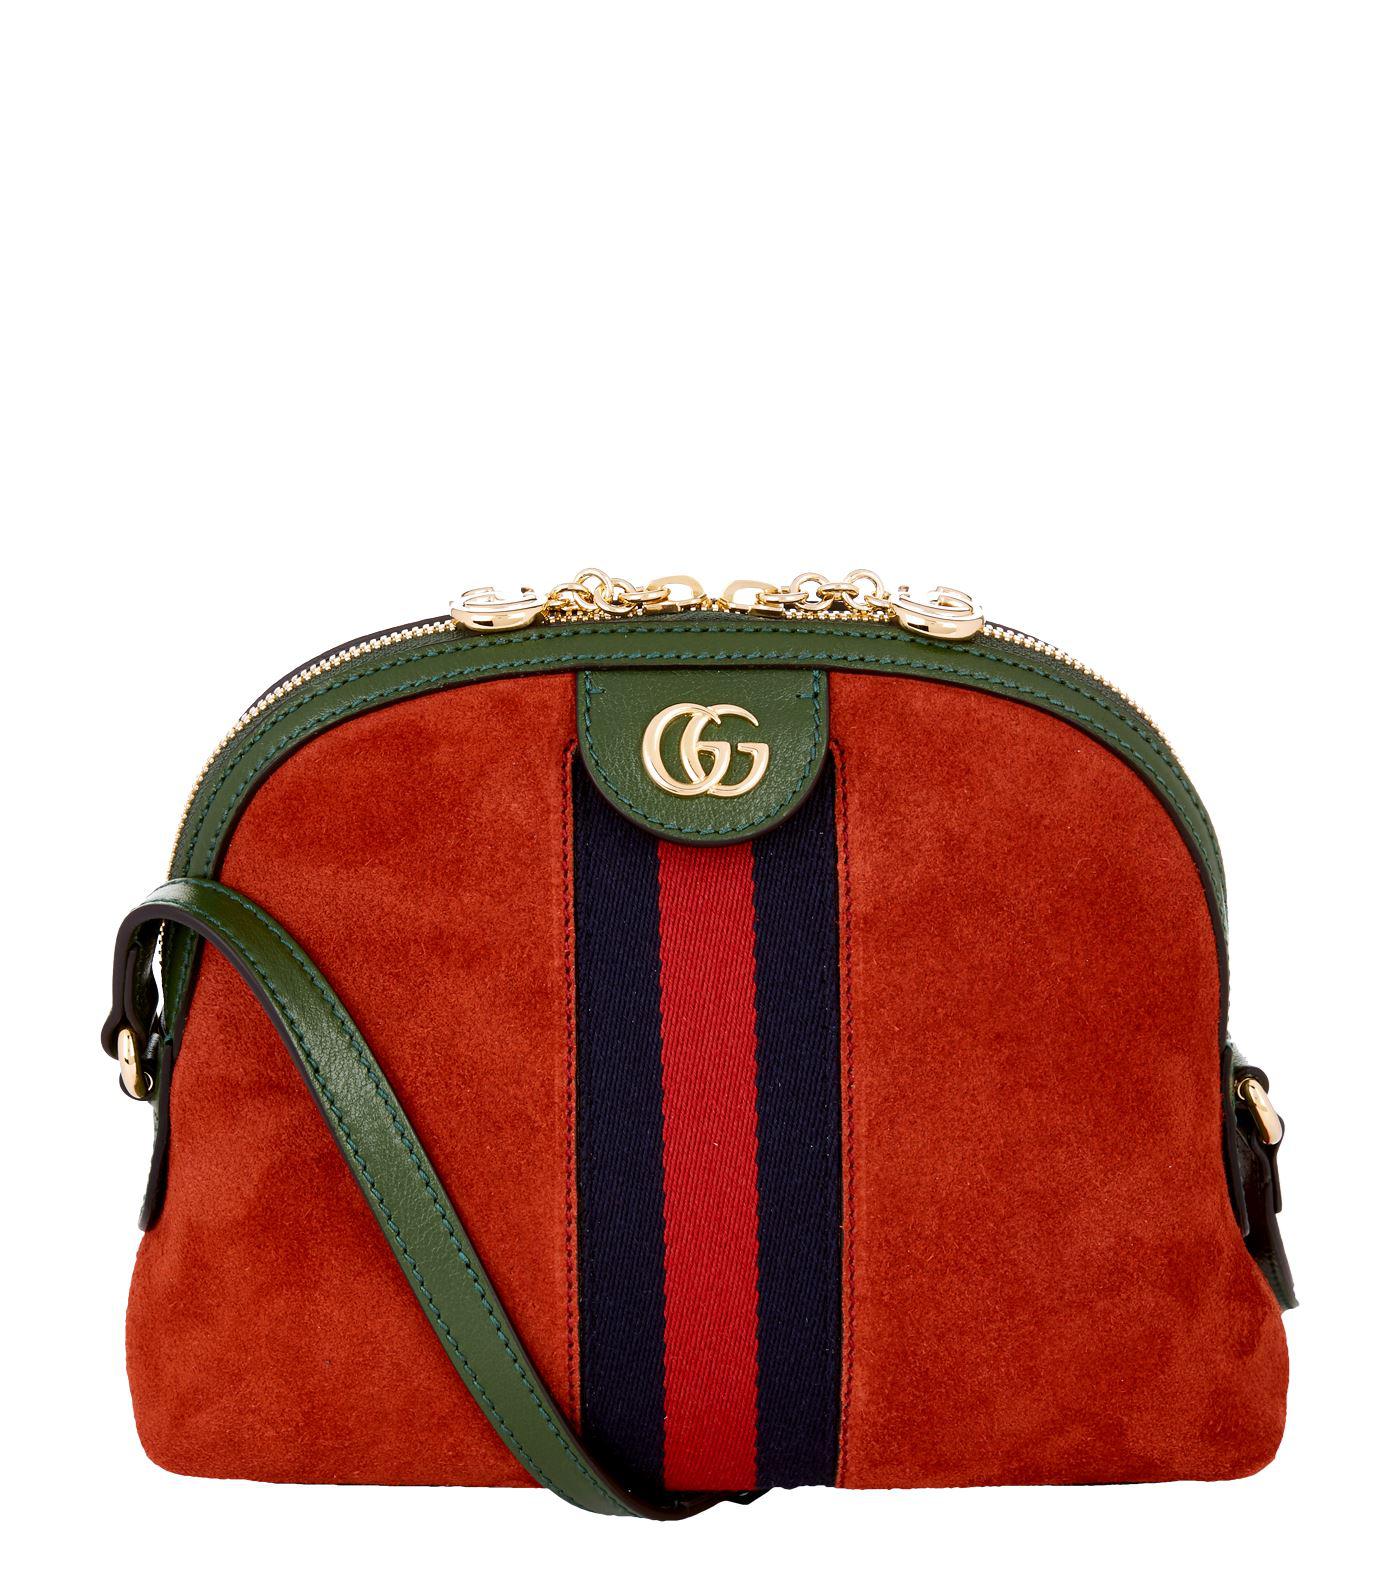 Lyst - Gucci Small Suede Ophidia Shoulder Bag in Red